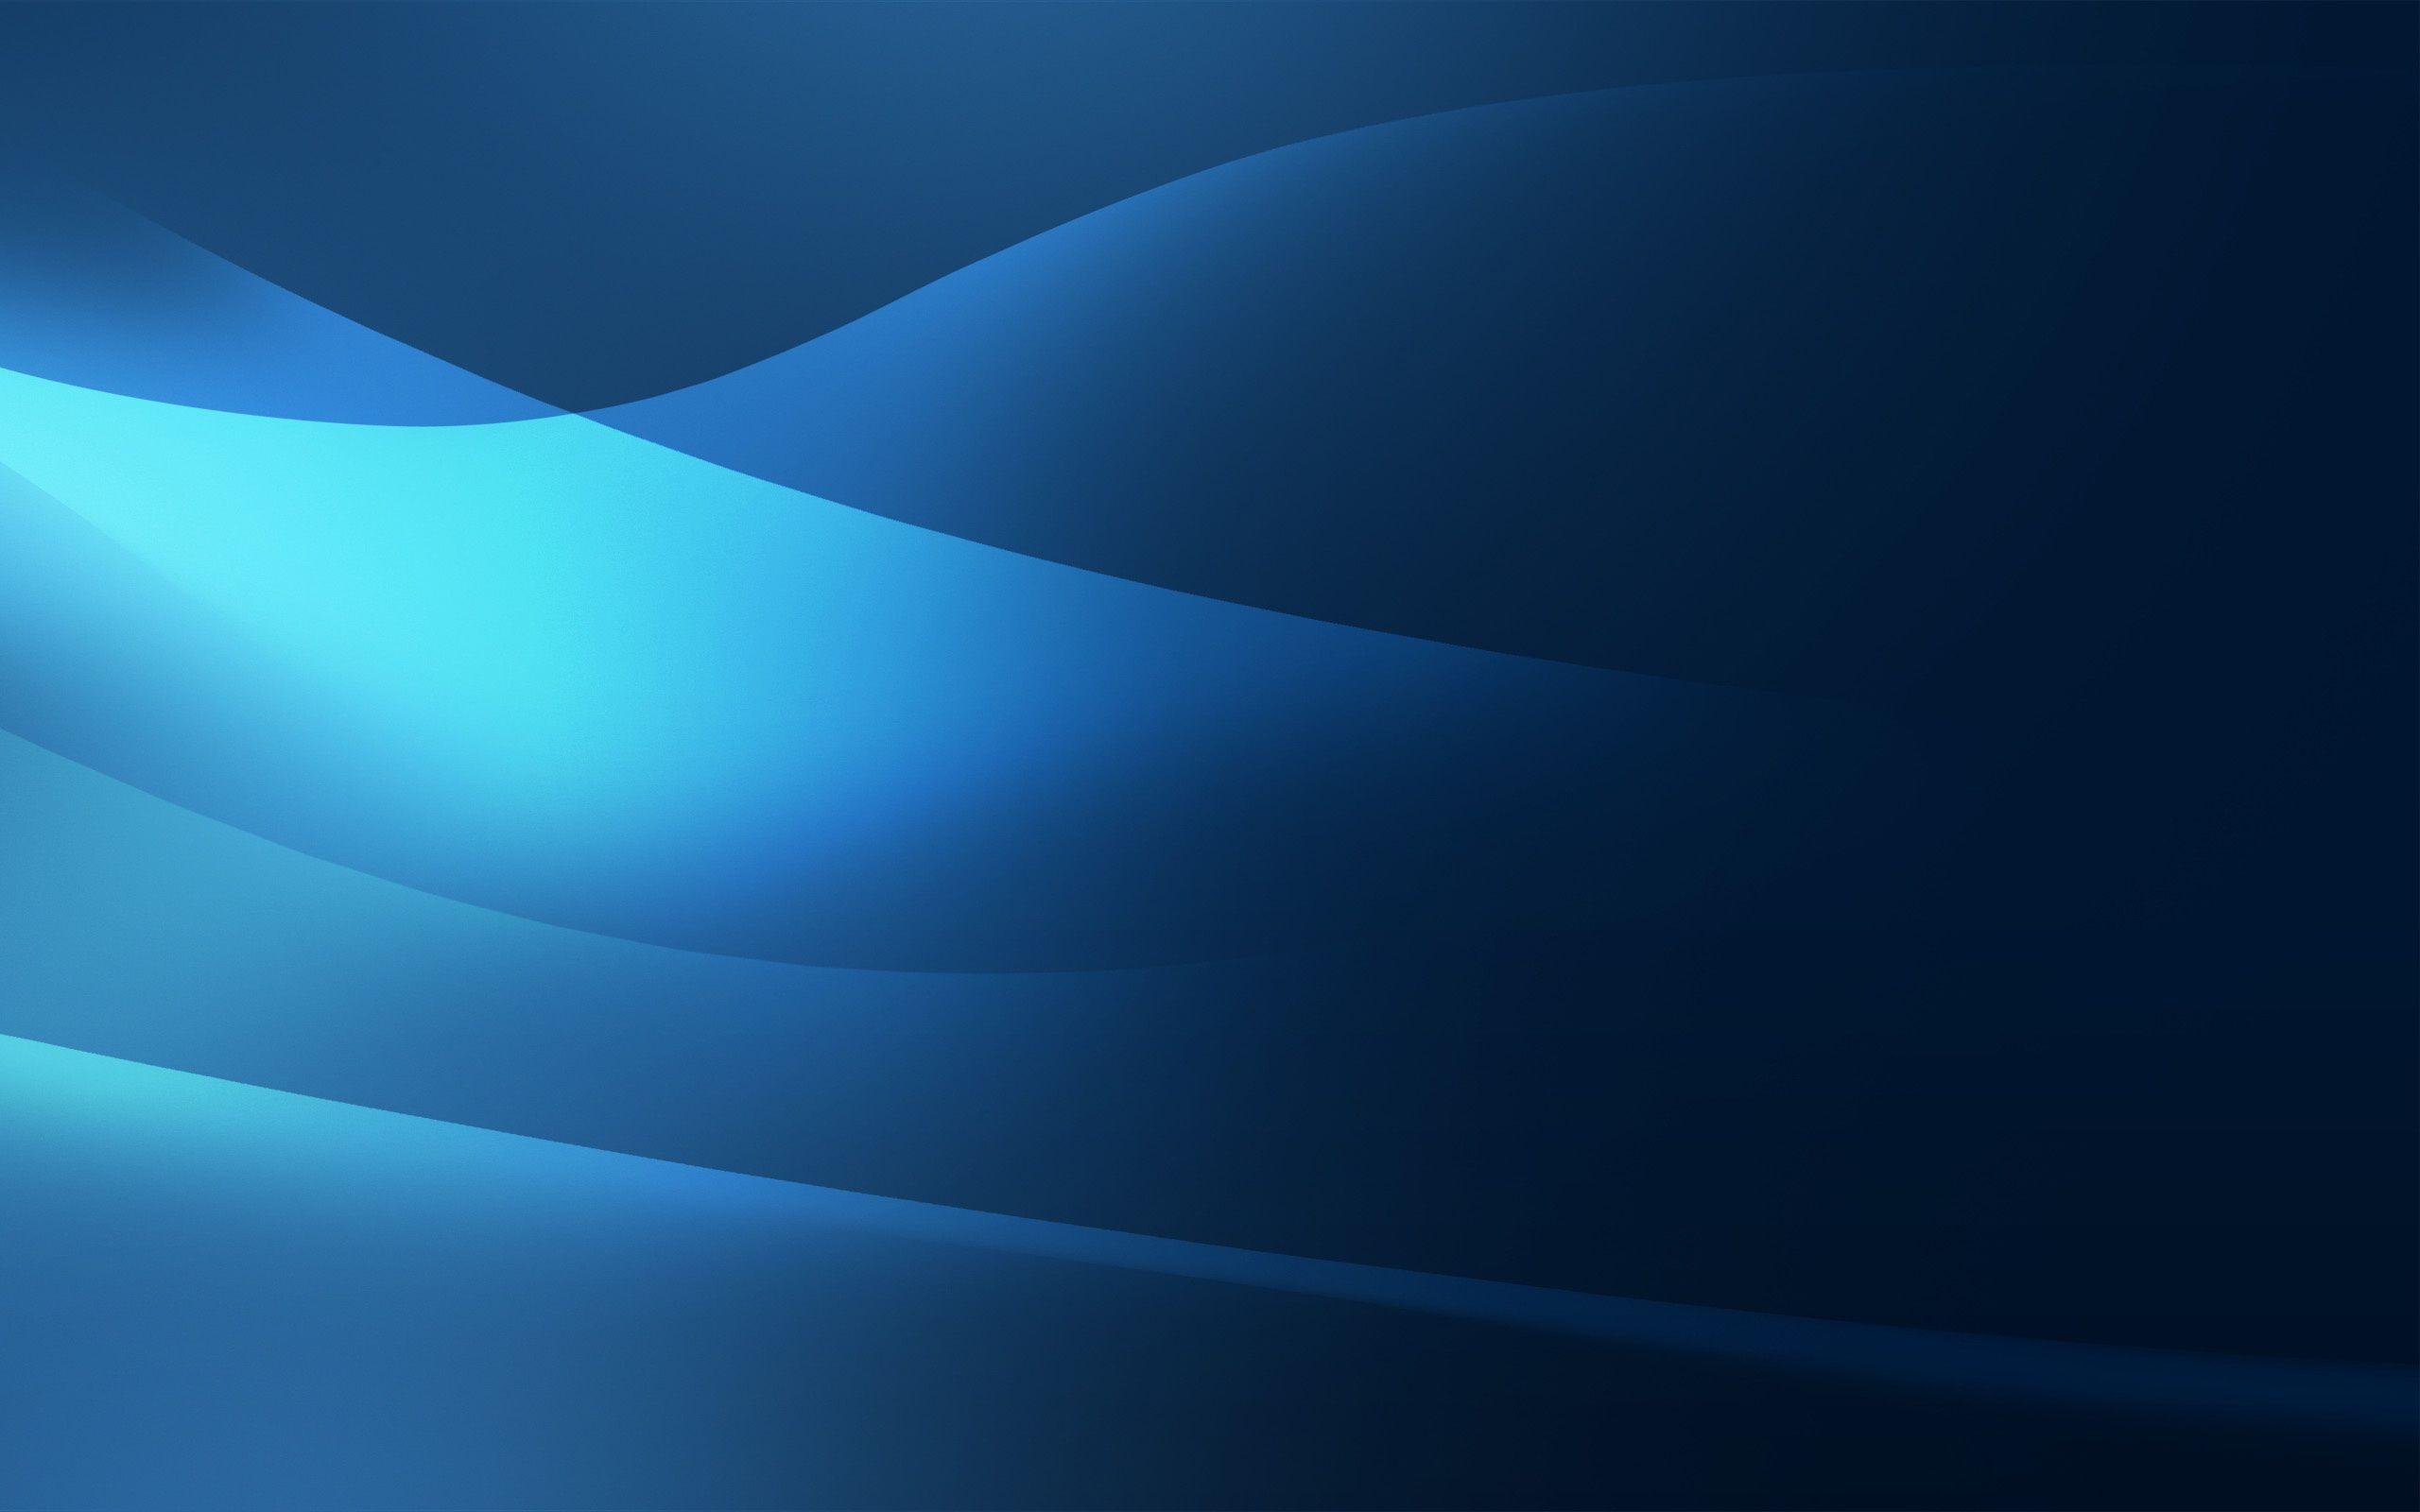 Blue waves background background in 2560x1600 resolution. HD